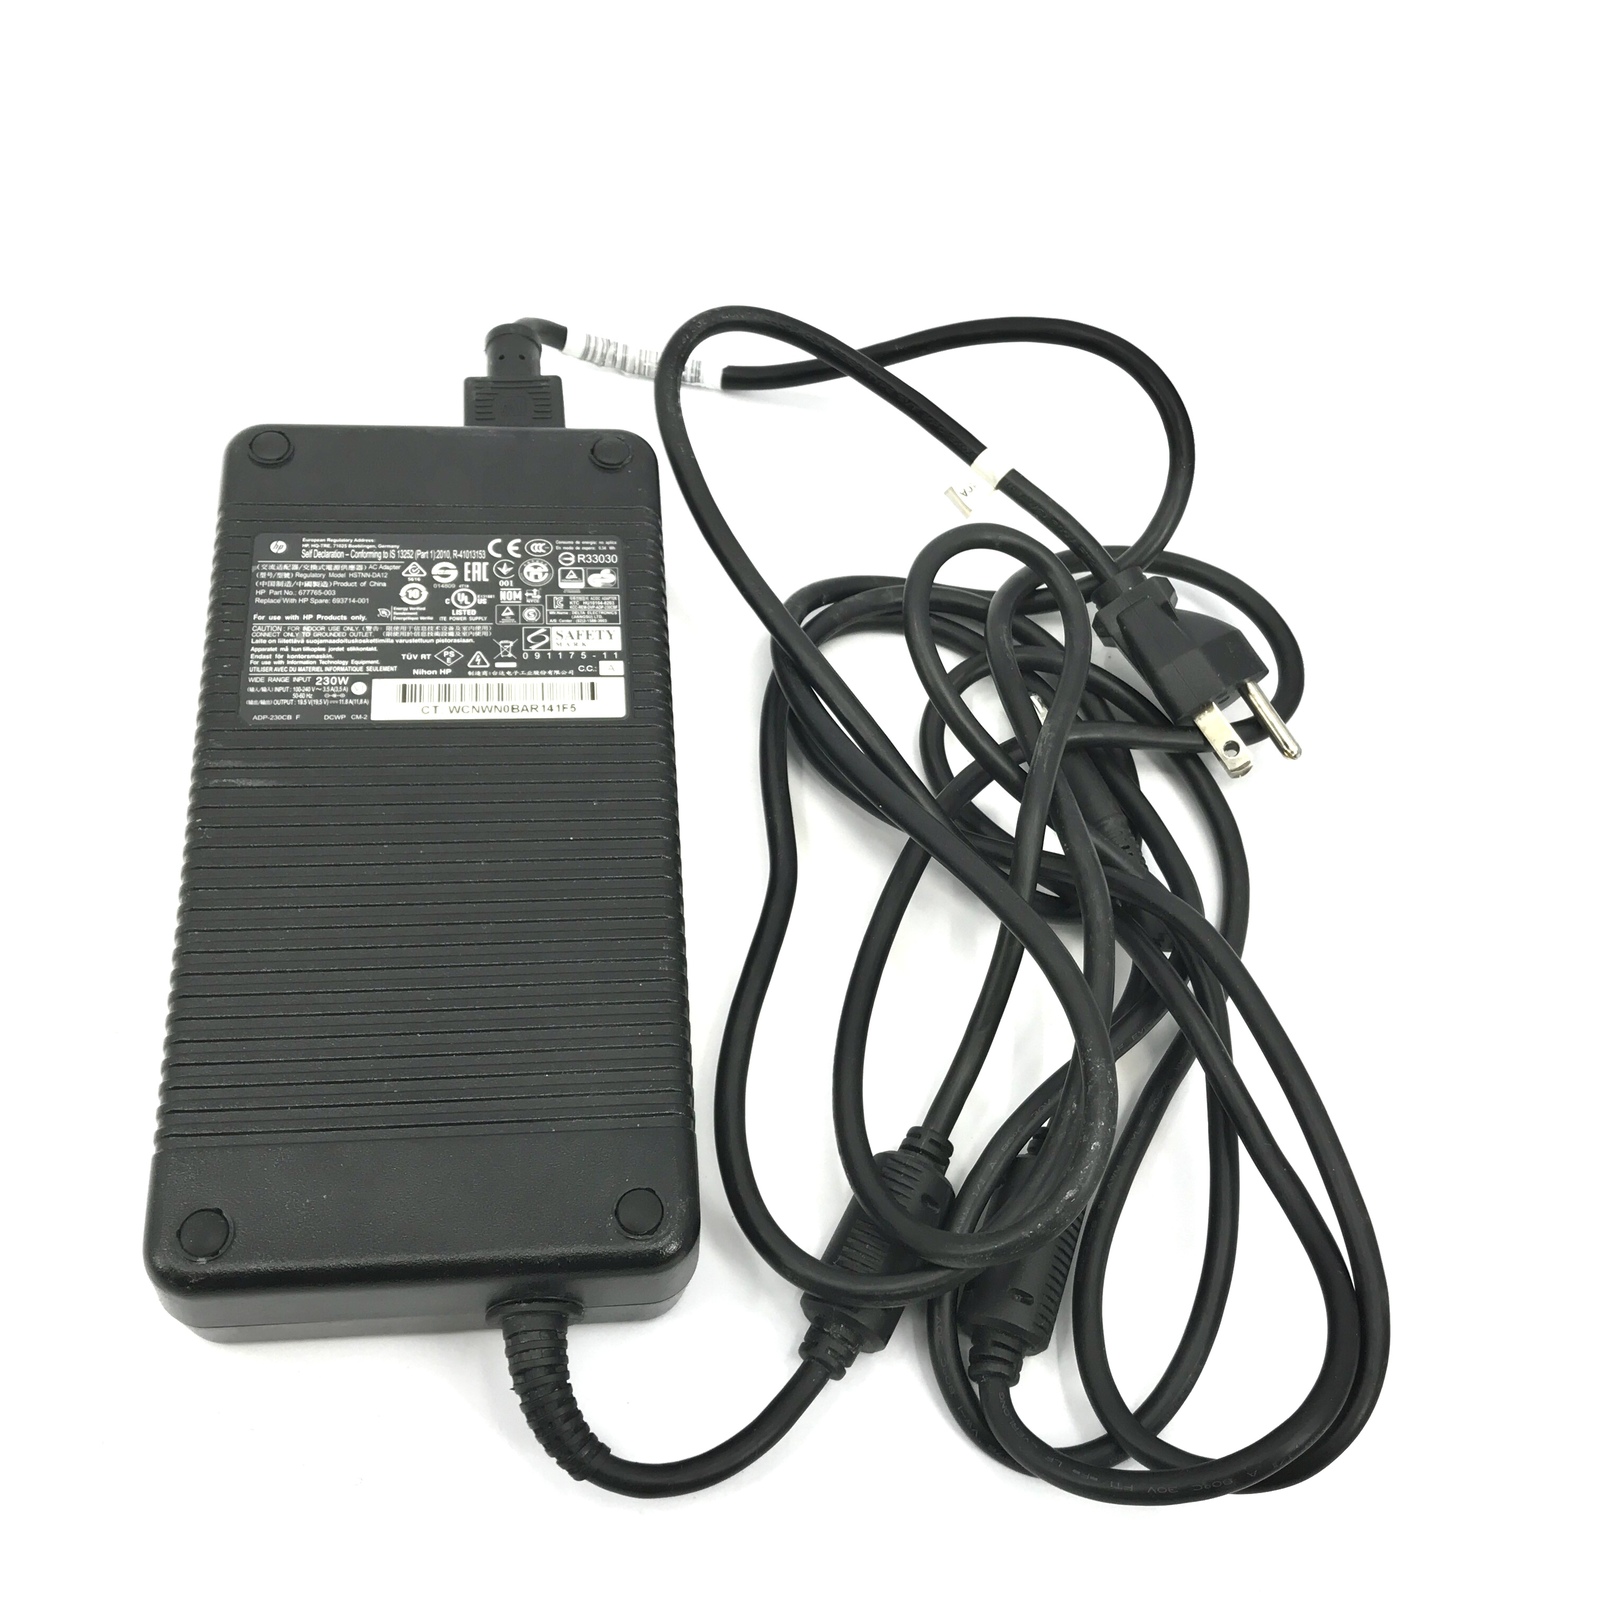 Primary image for HP HSTNN-DA12 230W Laptop AC Power Supply Adapter Charger 19.5V - Black #U5359